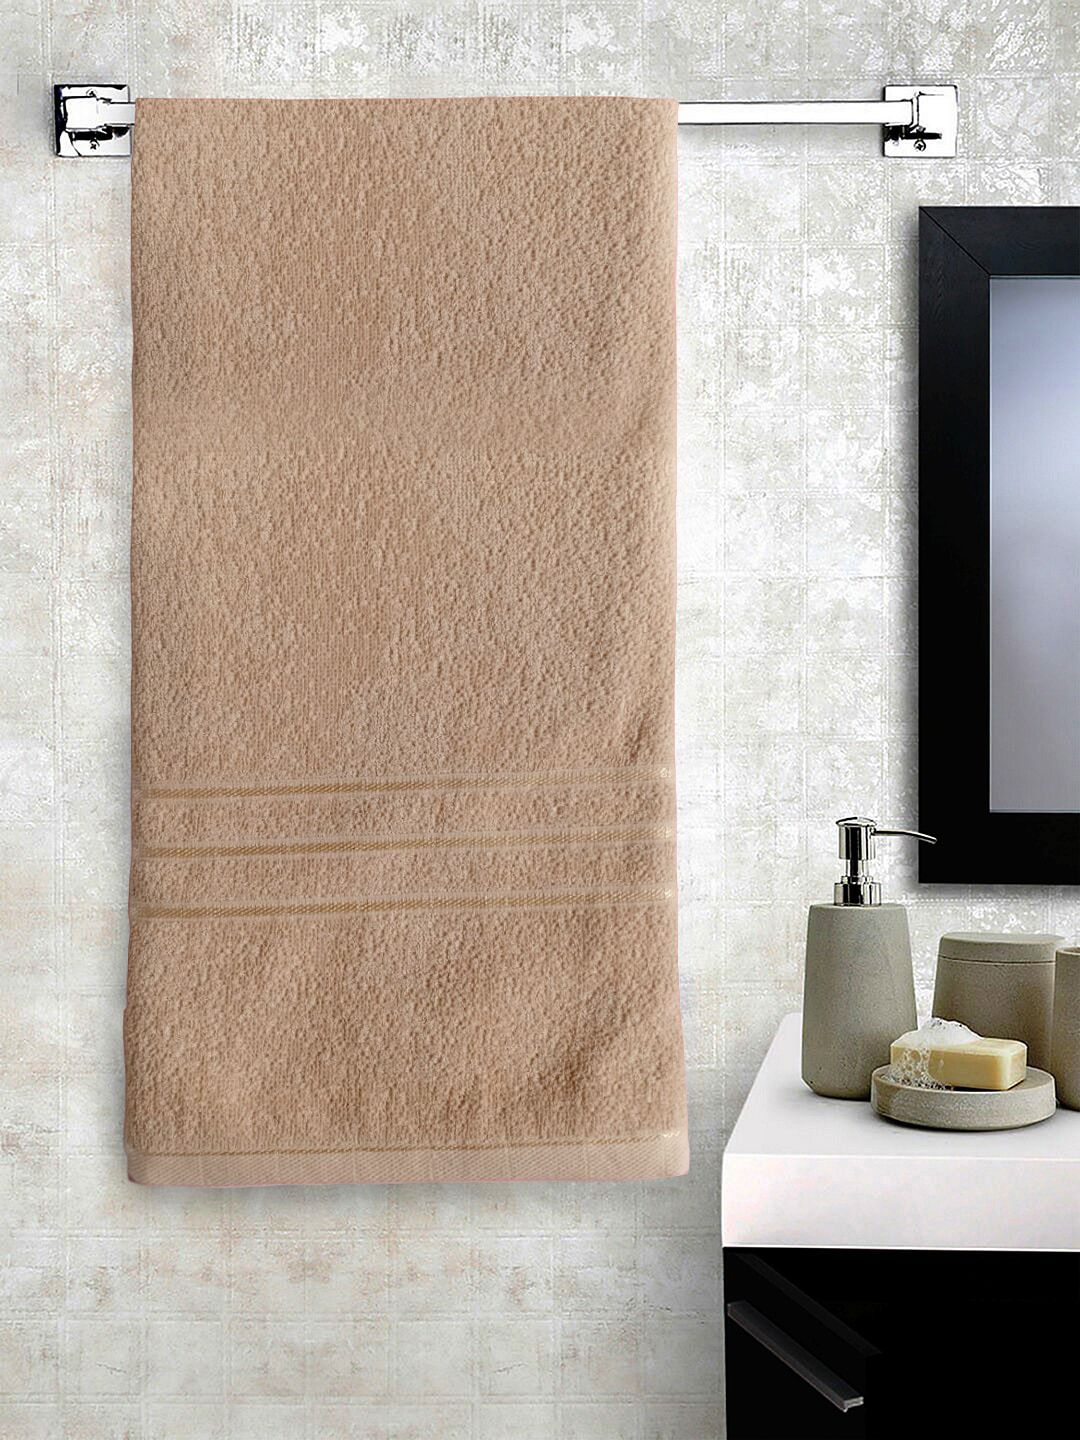 Lushomes Beige Solid Cotton 400 GSM Bath Towel Price in India